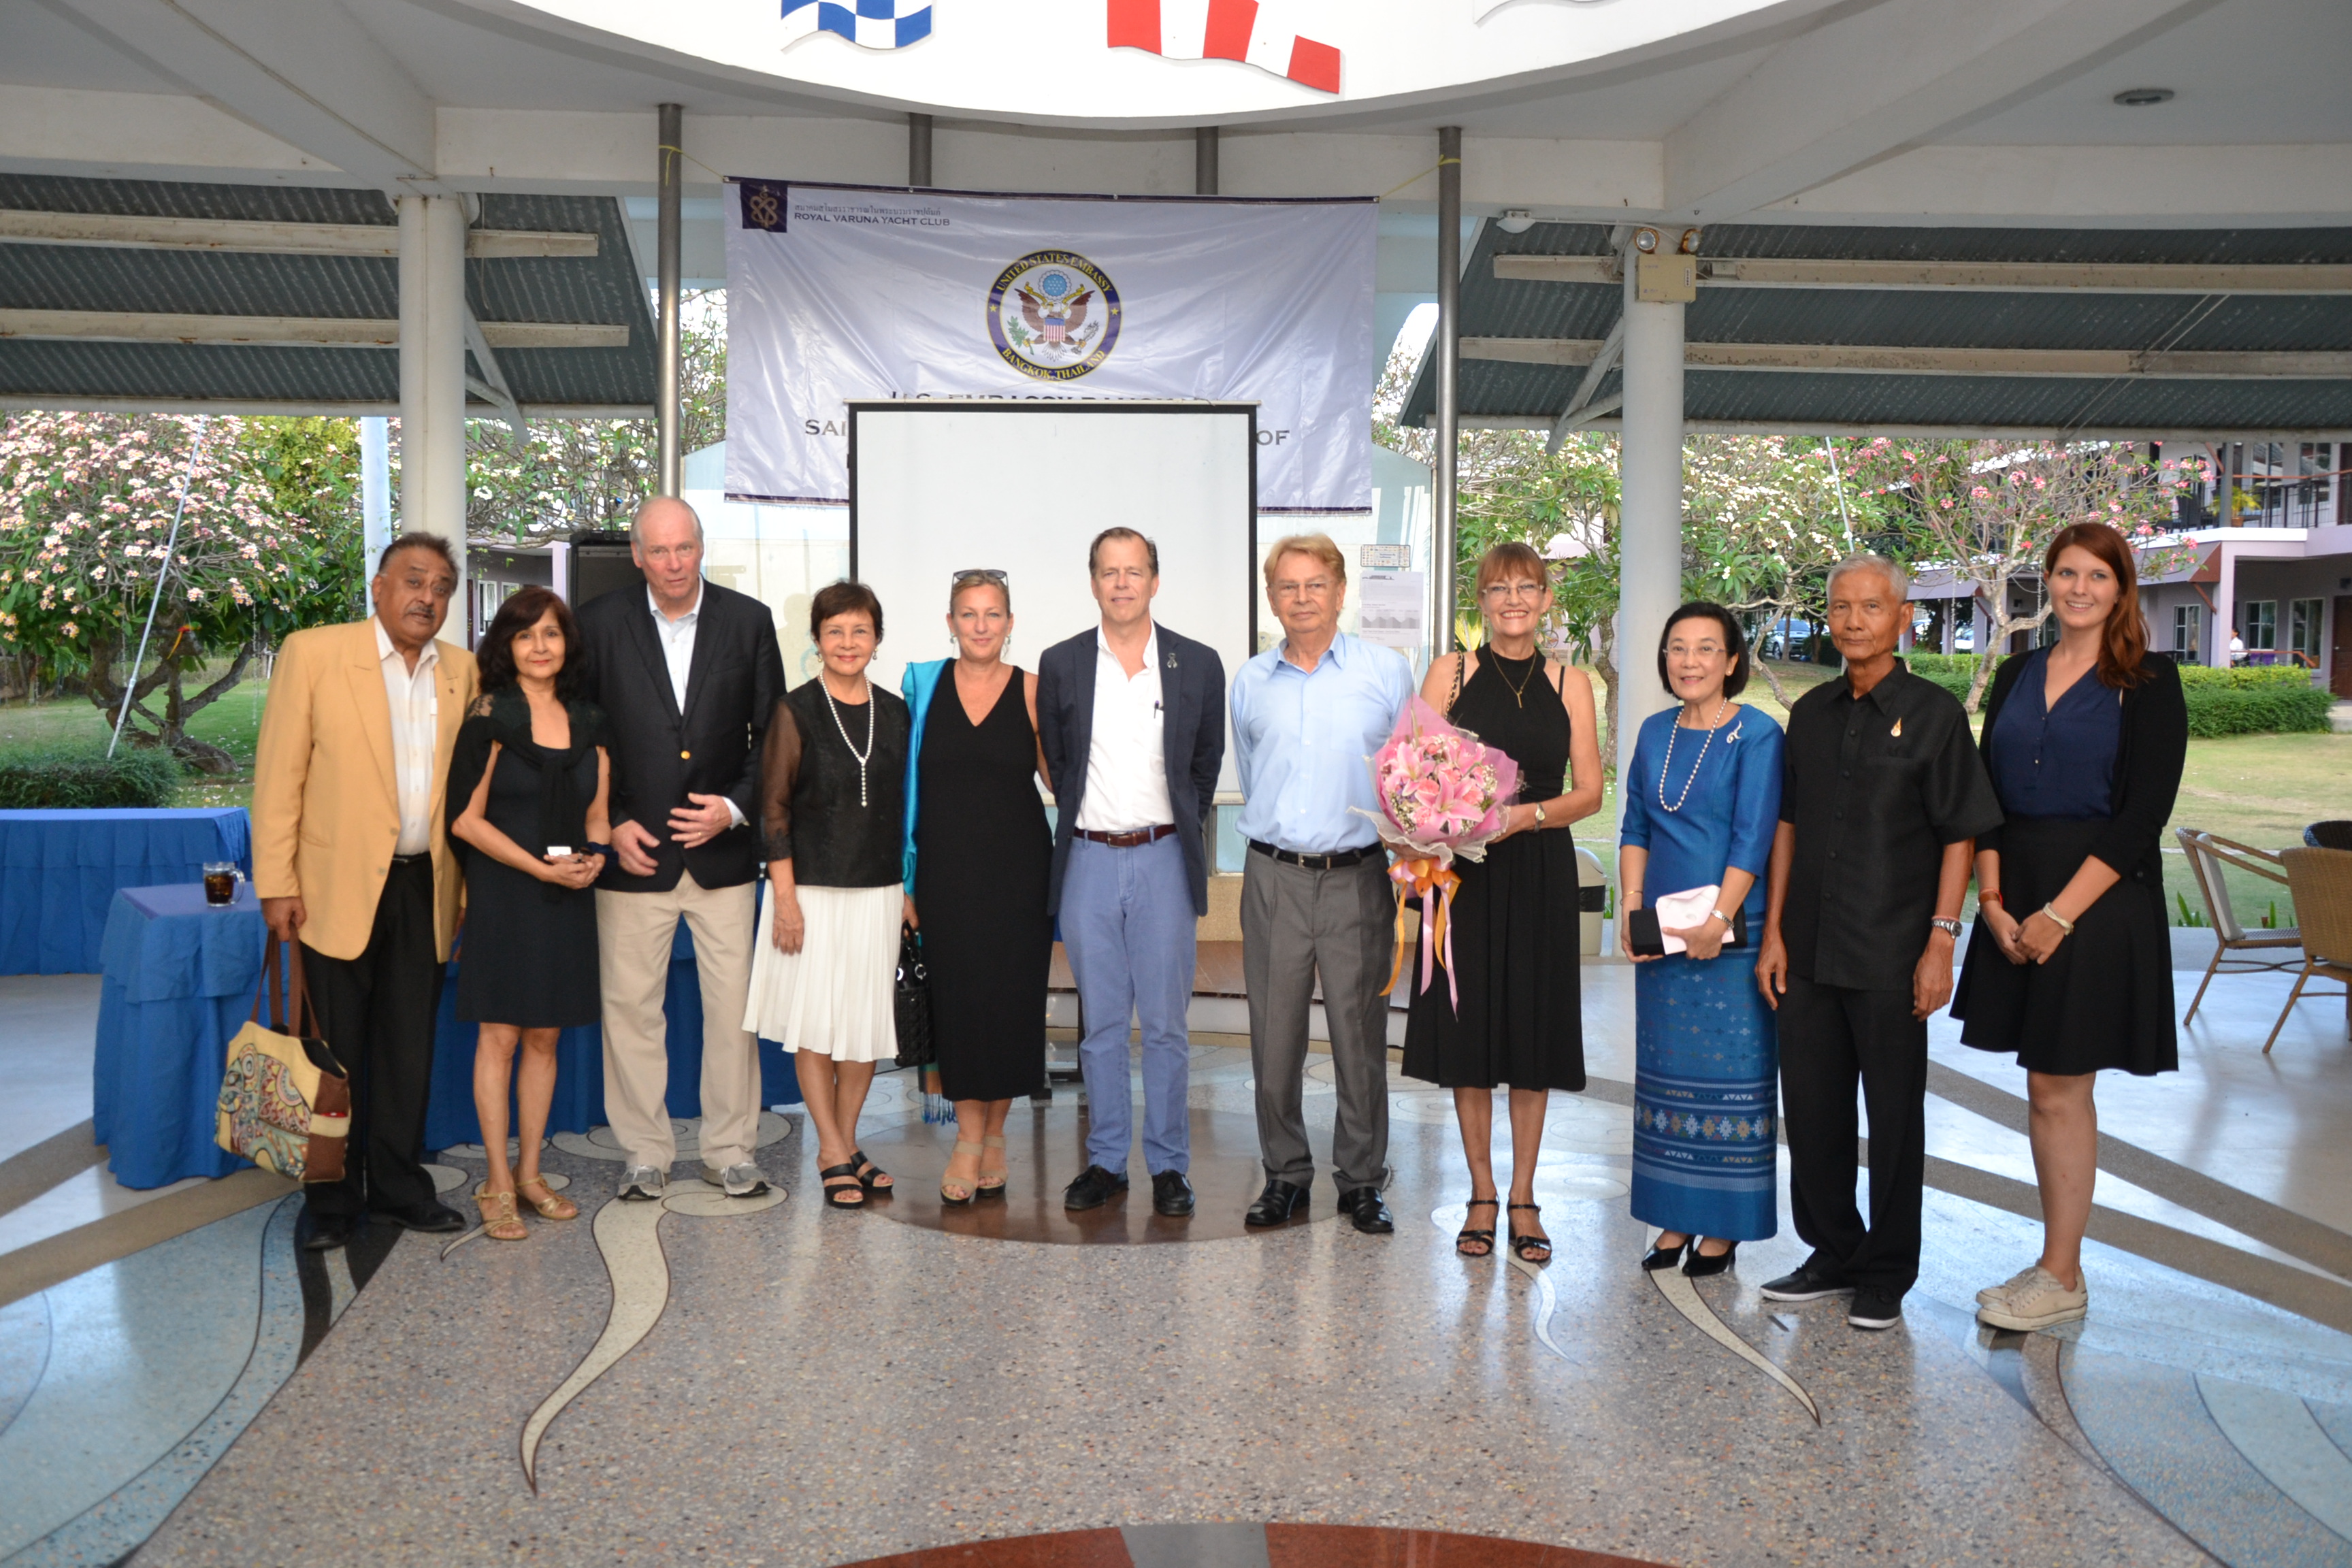 Ambassador Davies, Jackie and Gary Jobson pose for photos with community leaders.